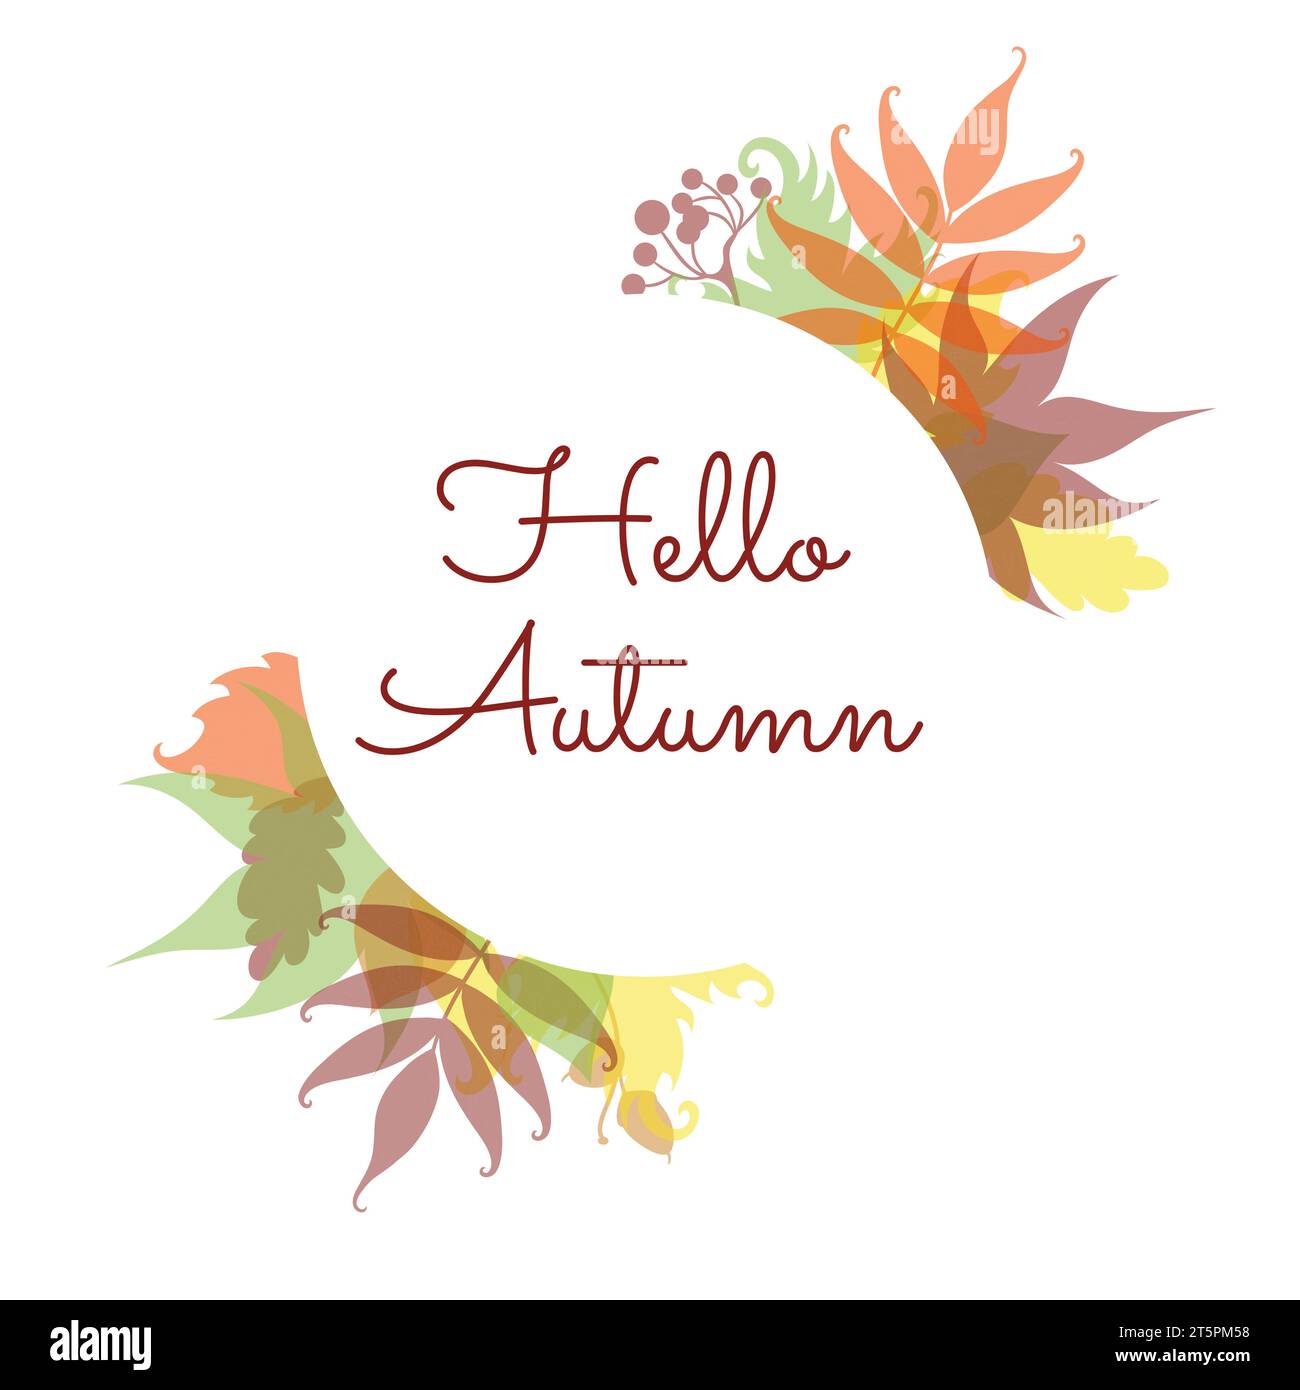 Autumn leaves and Hello Autumn text on the white circle. Isolated on white. Stock Vector